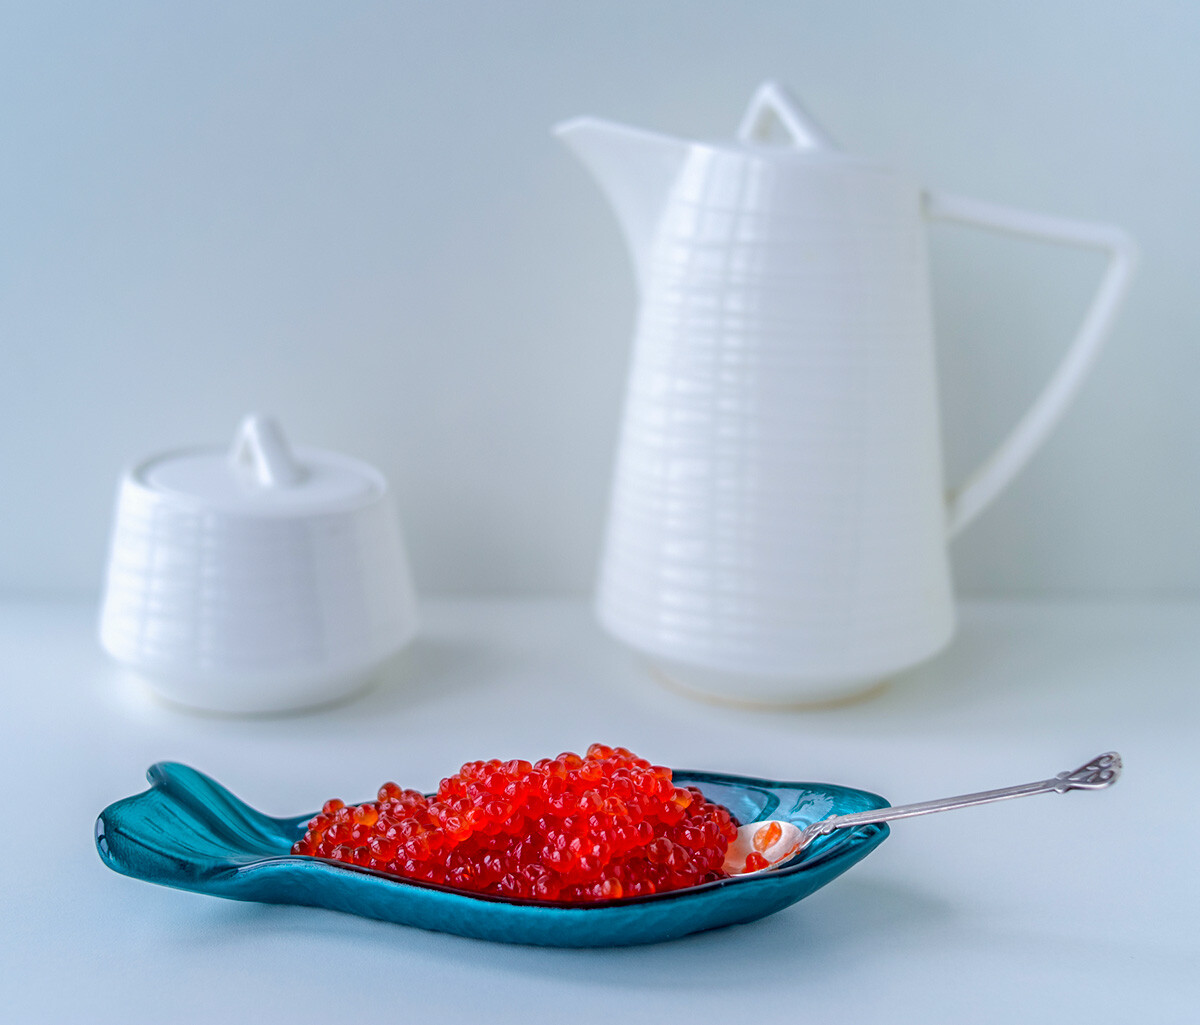 The silver salmon roe contains many vitamins.